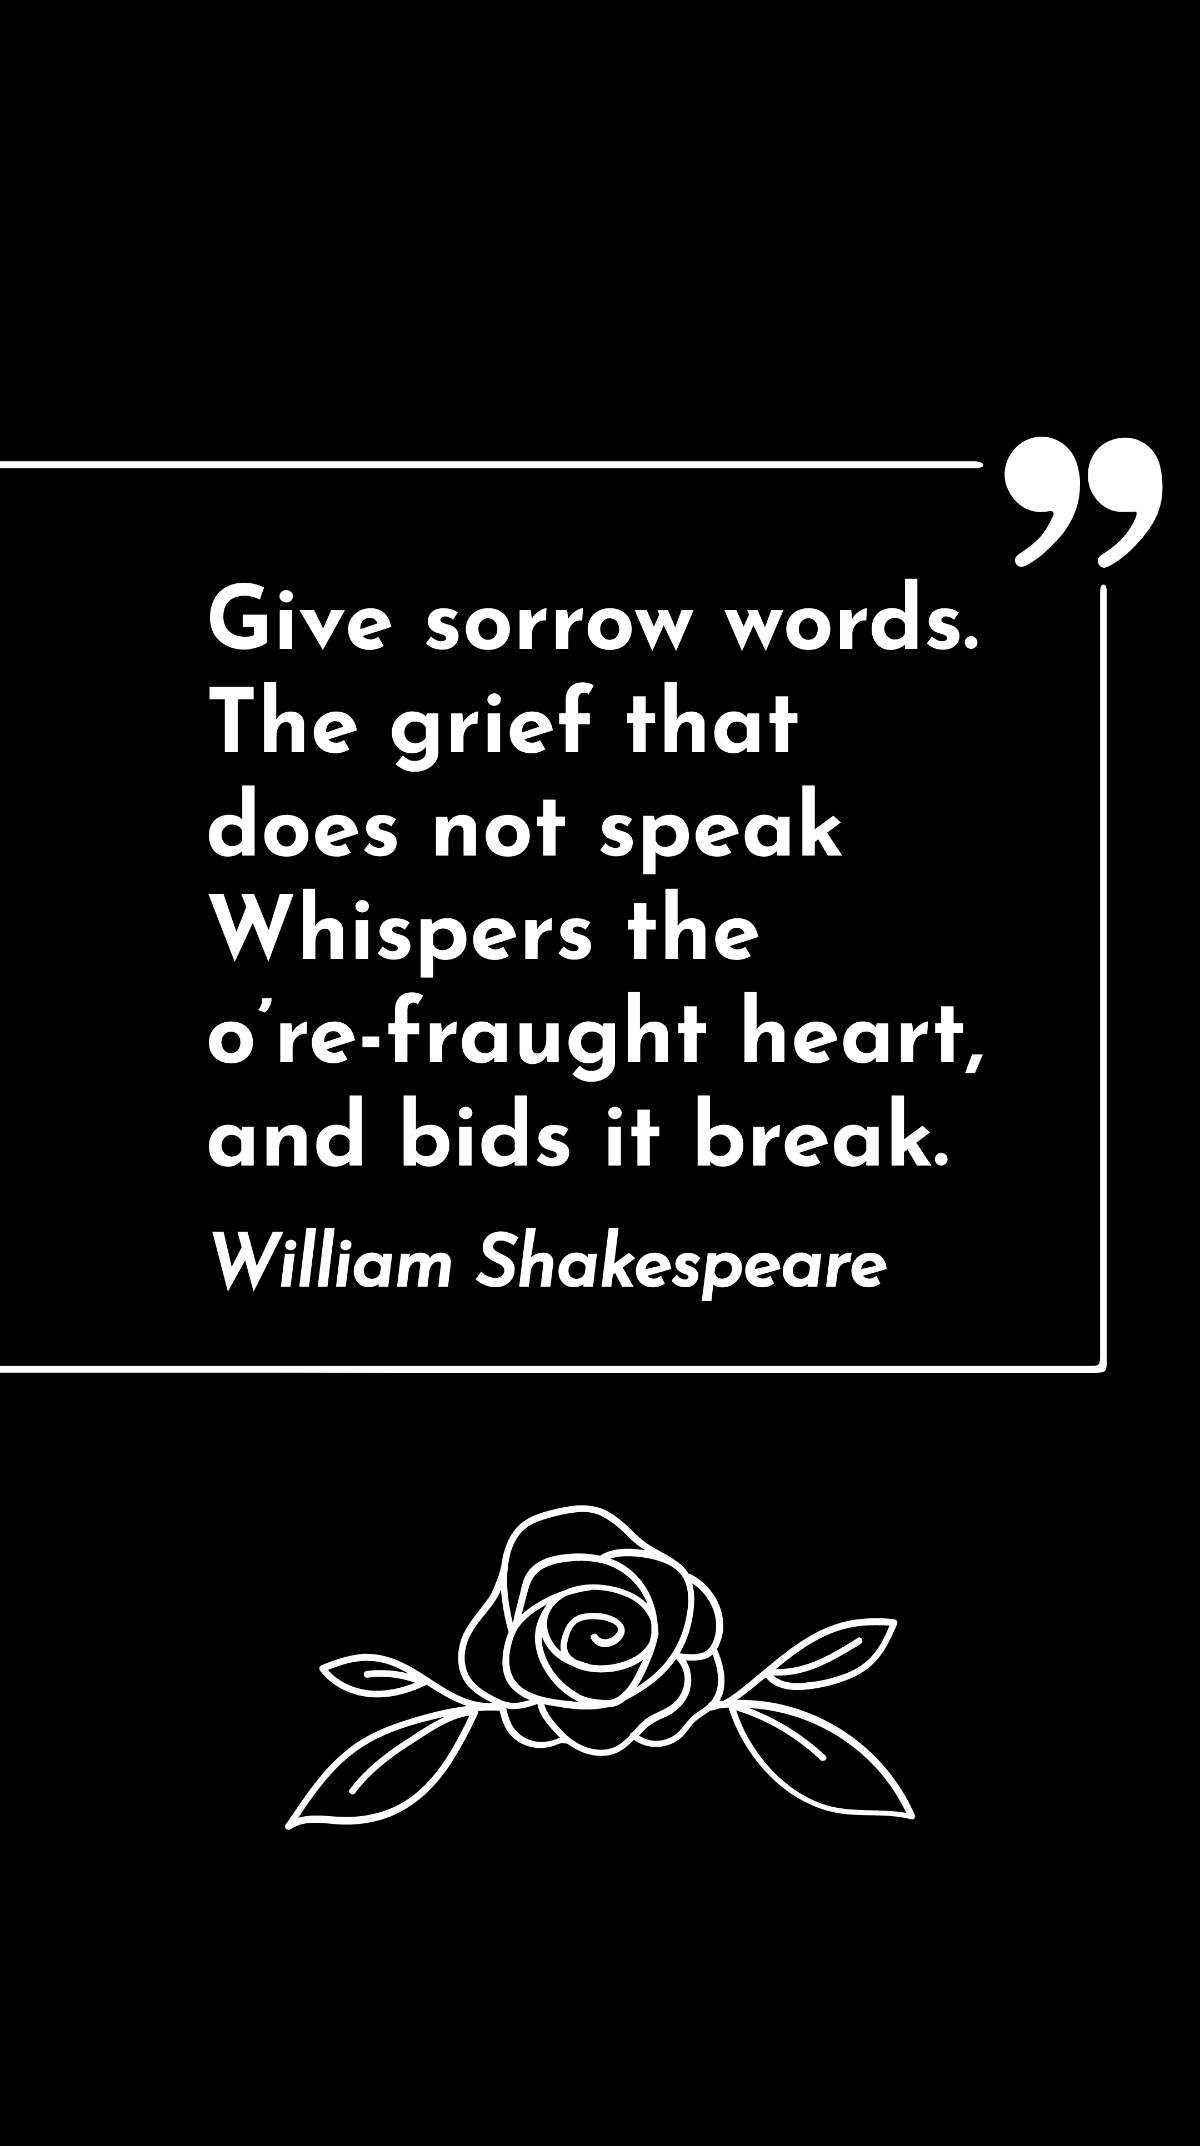 Free William Shakespeare - Give sorrow words. The grief that does not speak Whispers the o’re-fraught heart, and bids it break. Template